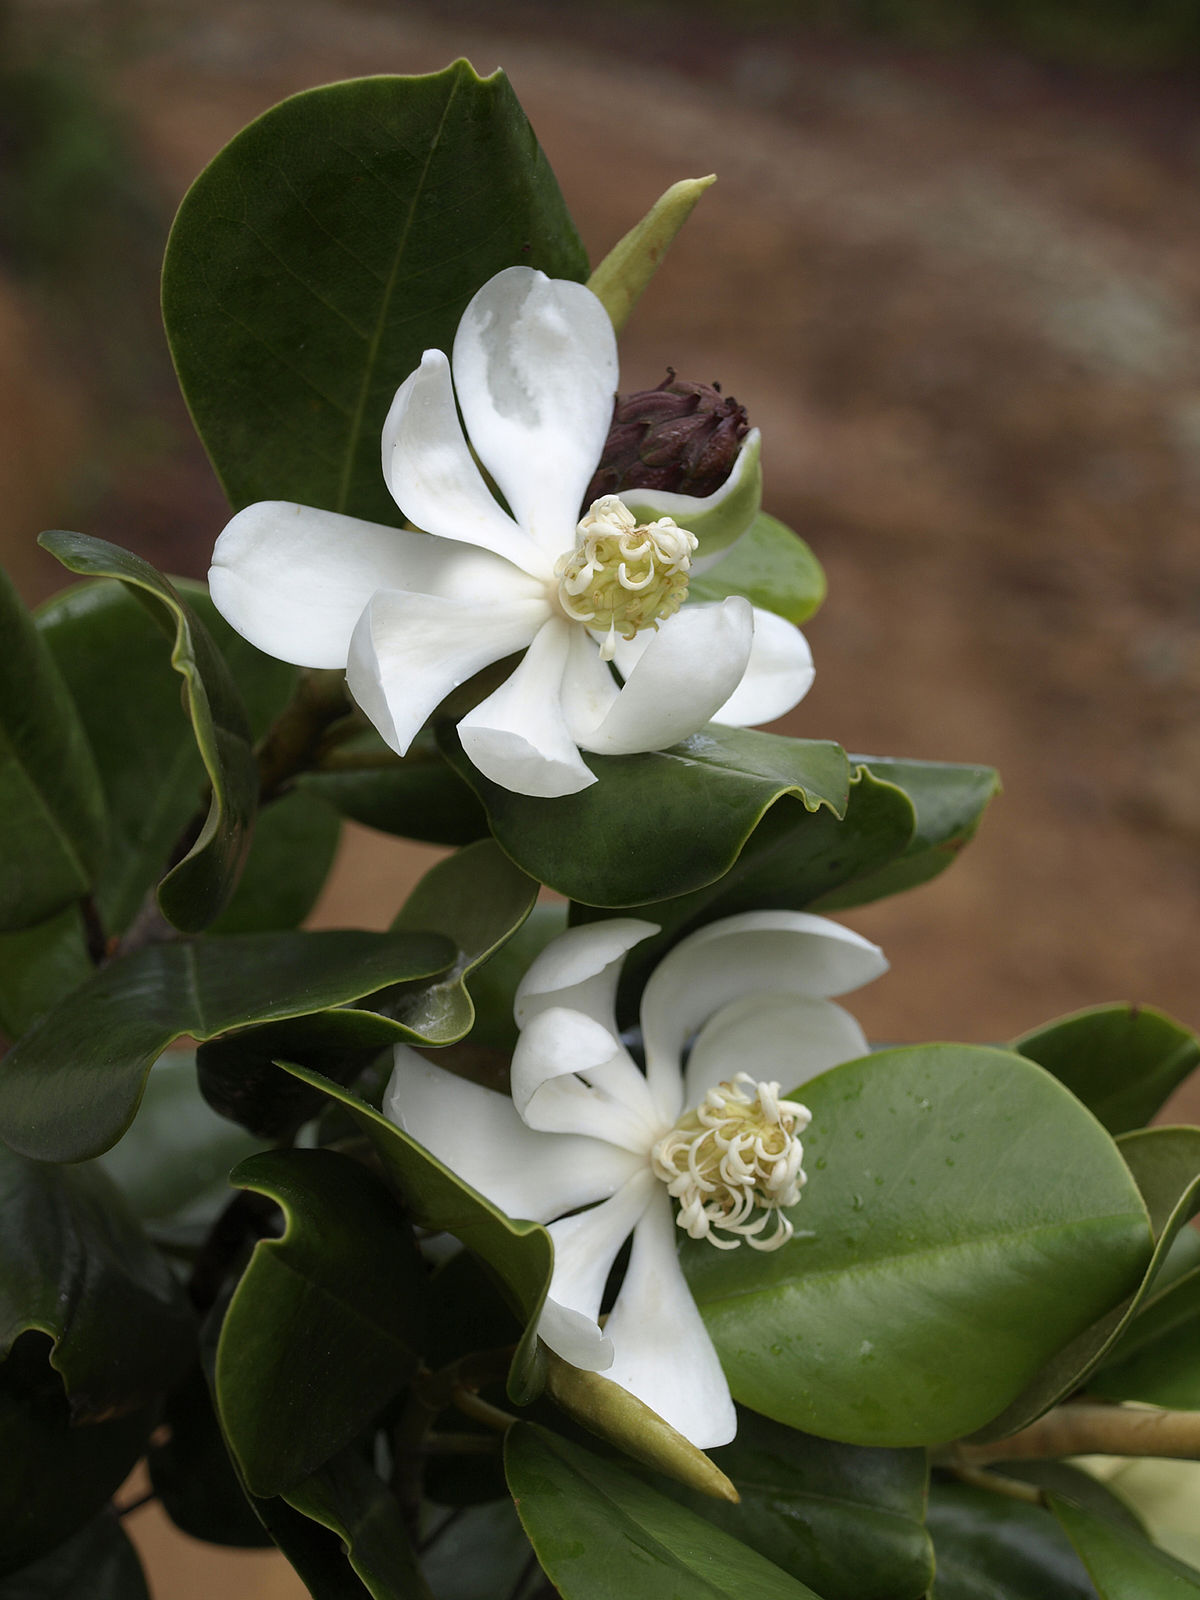 Magnolia pallascens flowers are large with white, oval, curled petals surrounding a large reproductive area.